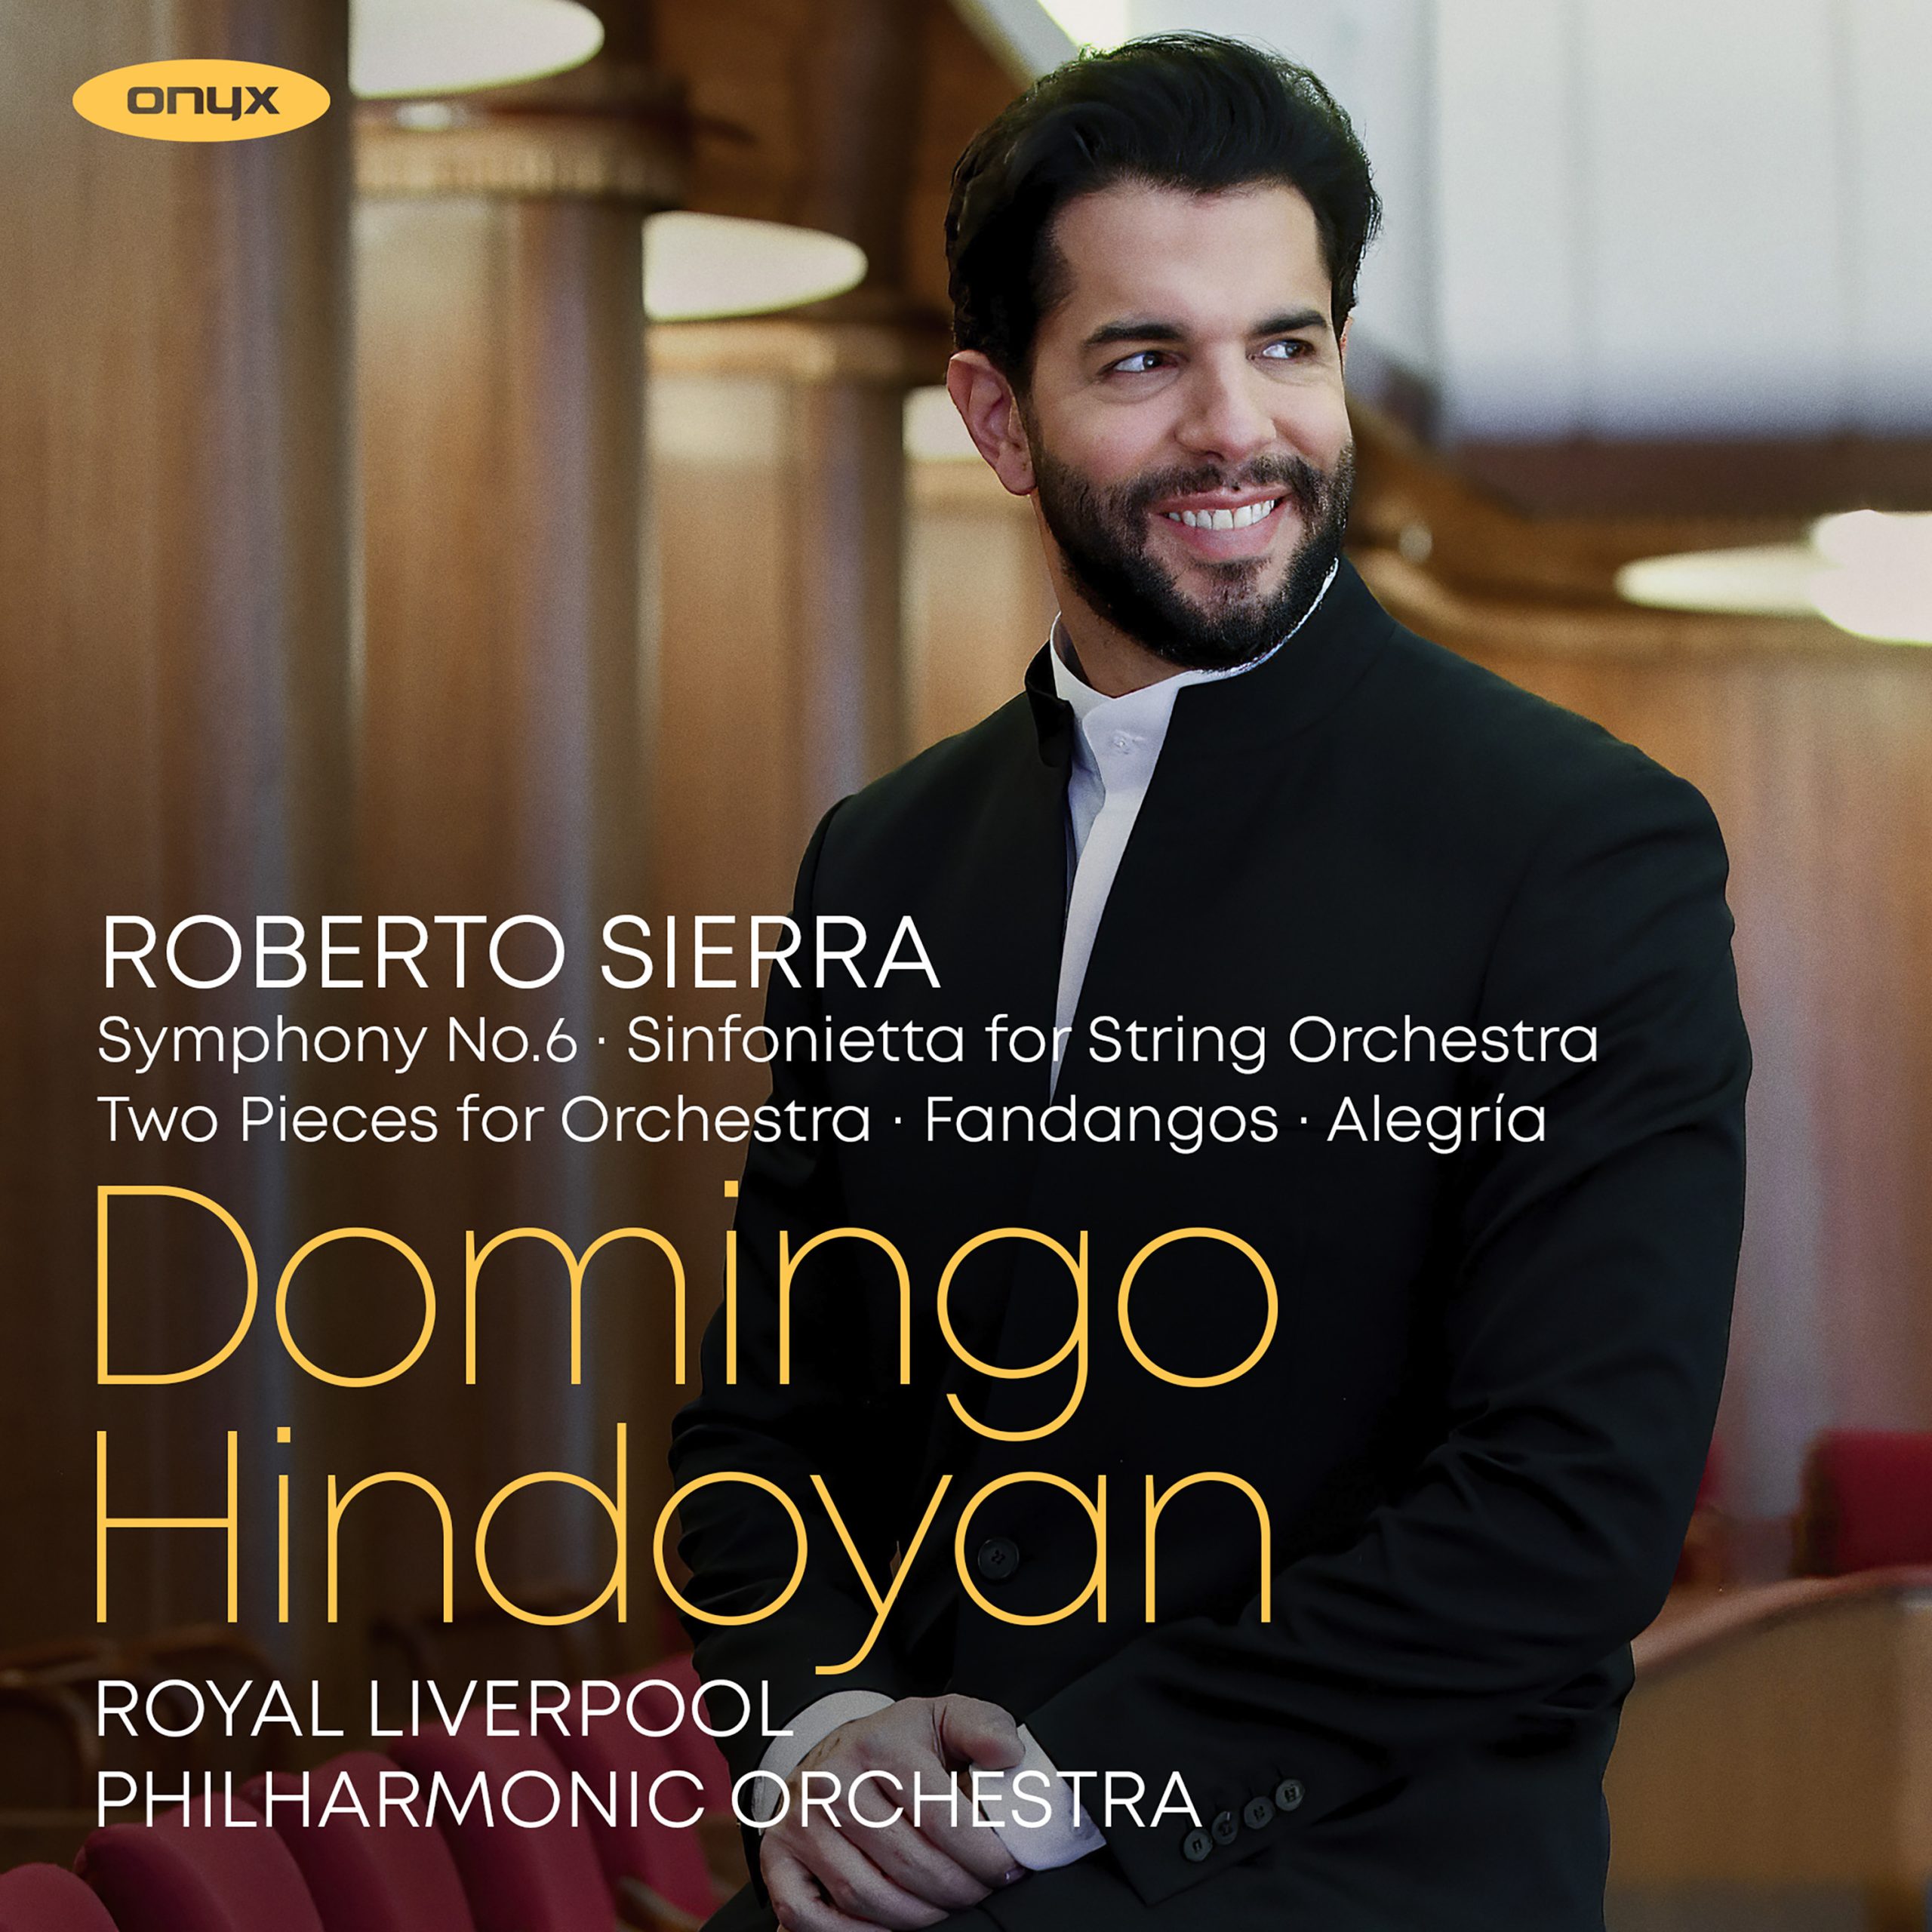 Roberto Sierra: Symphony No. 6, Sinfonietta for Strings, Fandagos & Two pieces for String Orchestra